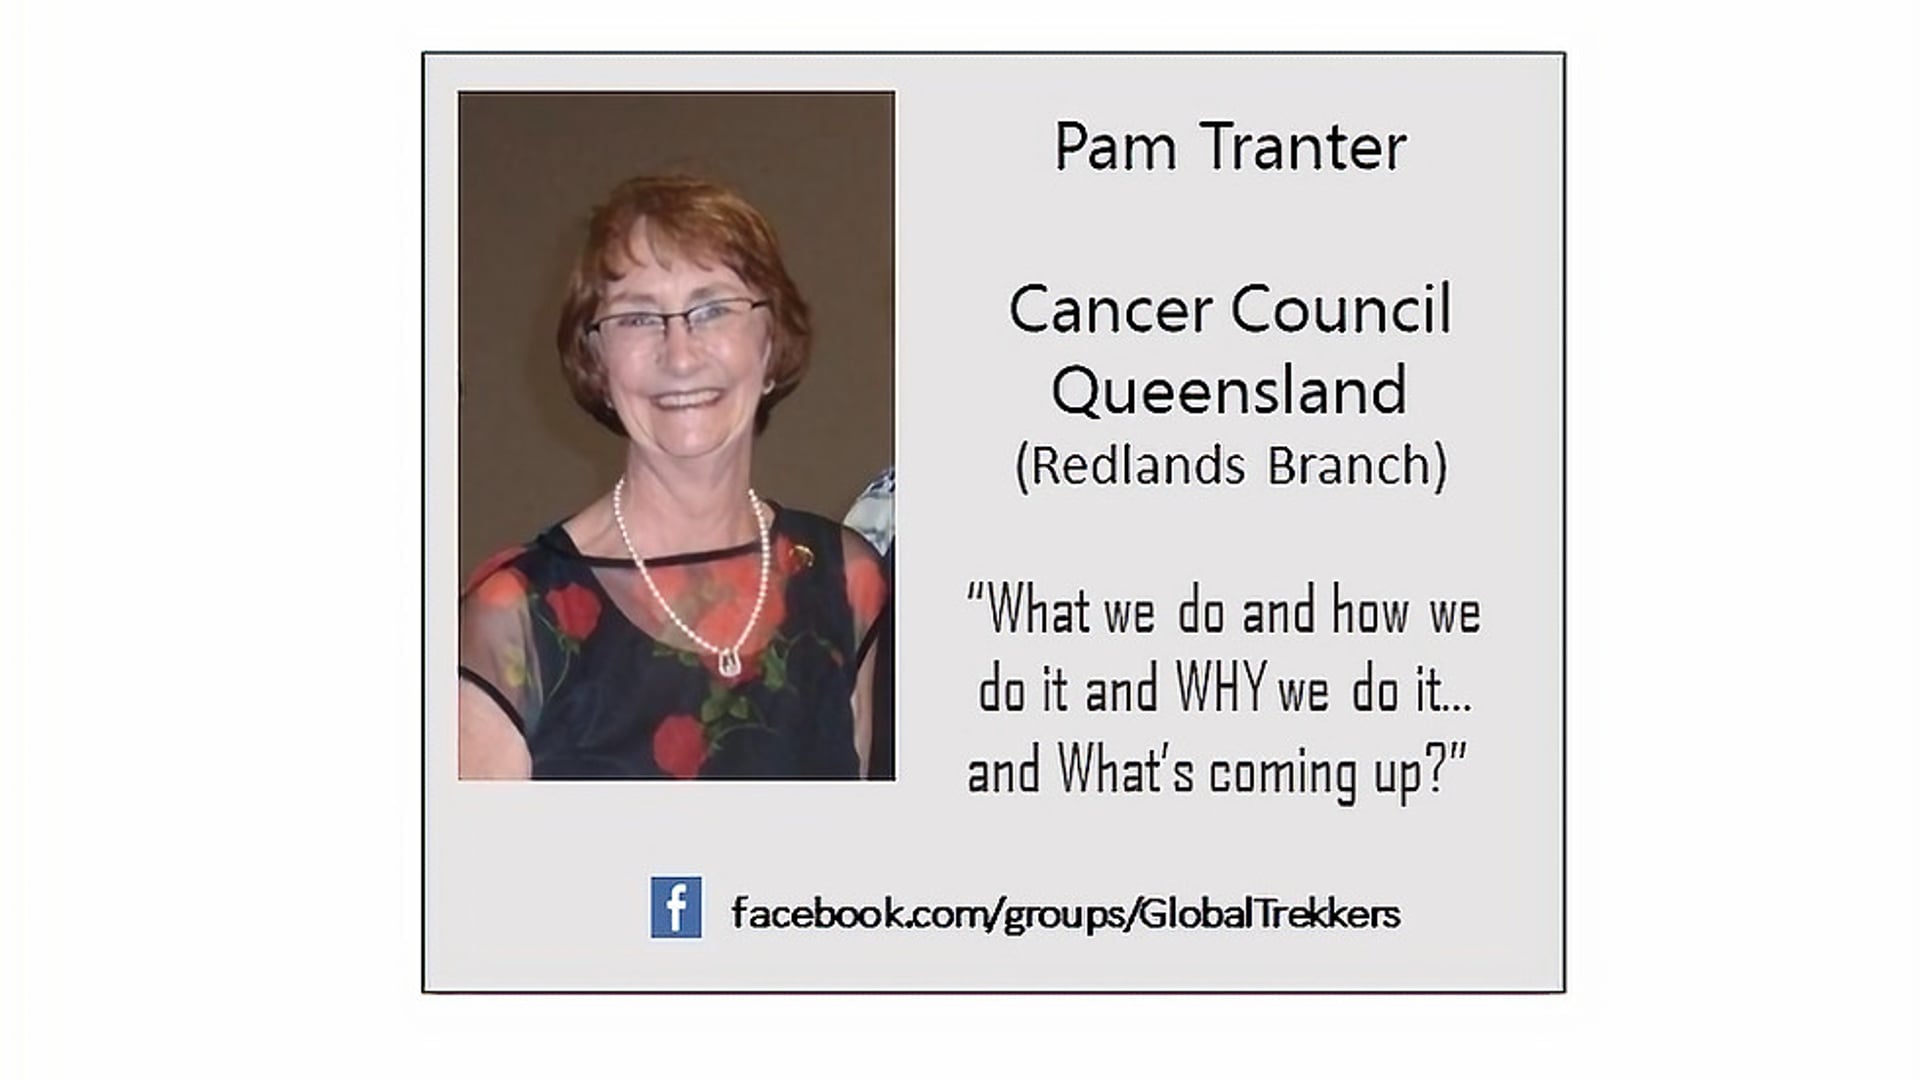 Pam Tranter - Fighting Cancer in the Community